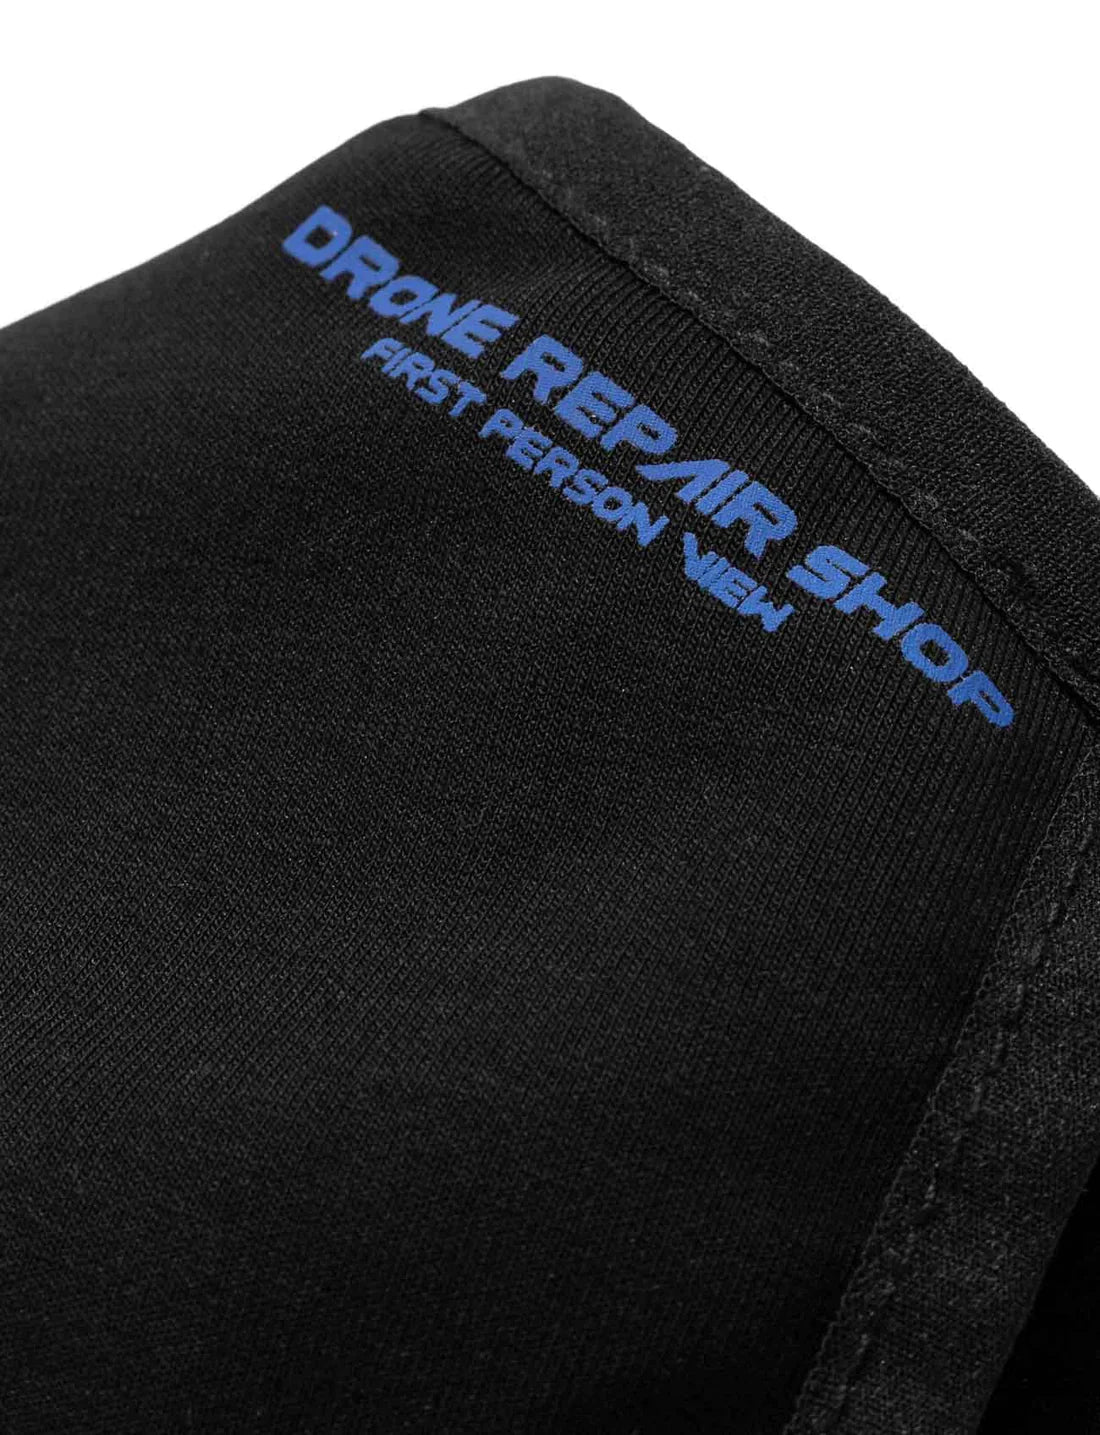 Close-up of the Drone Repair Shop Mask in black, with blue text detail along the edge, highlighting the 'First Person View' design element.